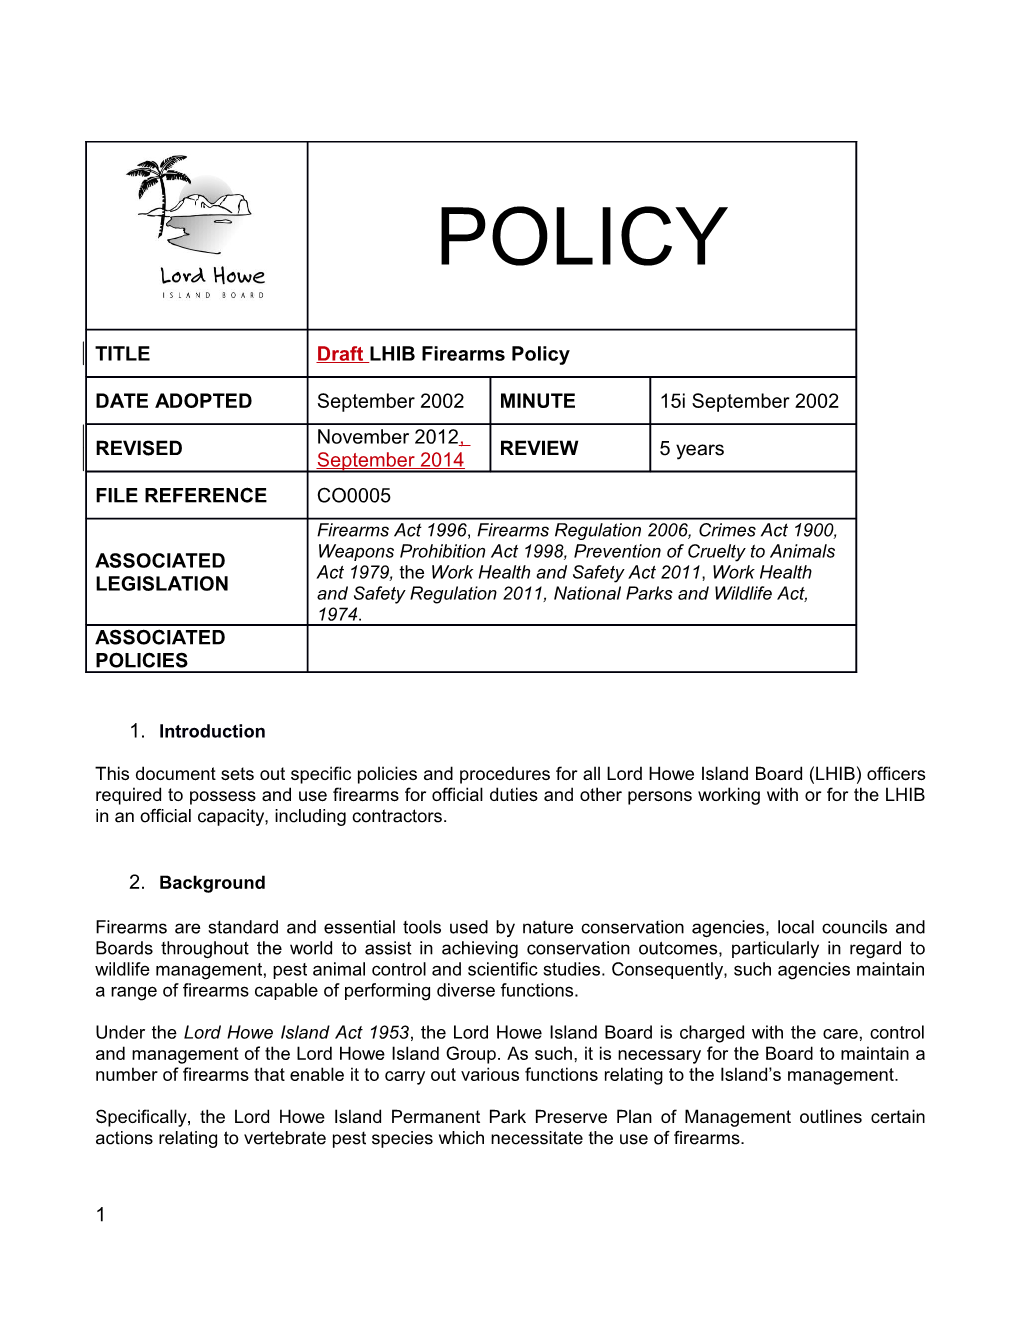 This Document Sets out Specific Policies and Procedures for All Lord Howe Island Board